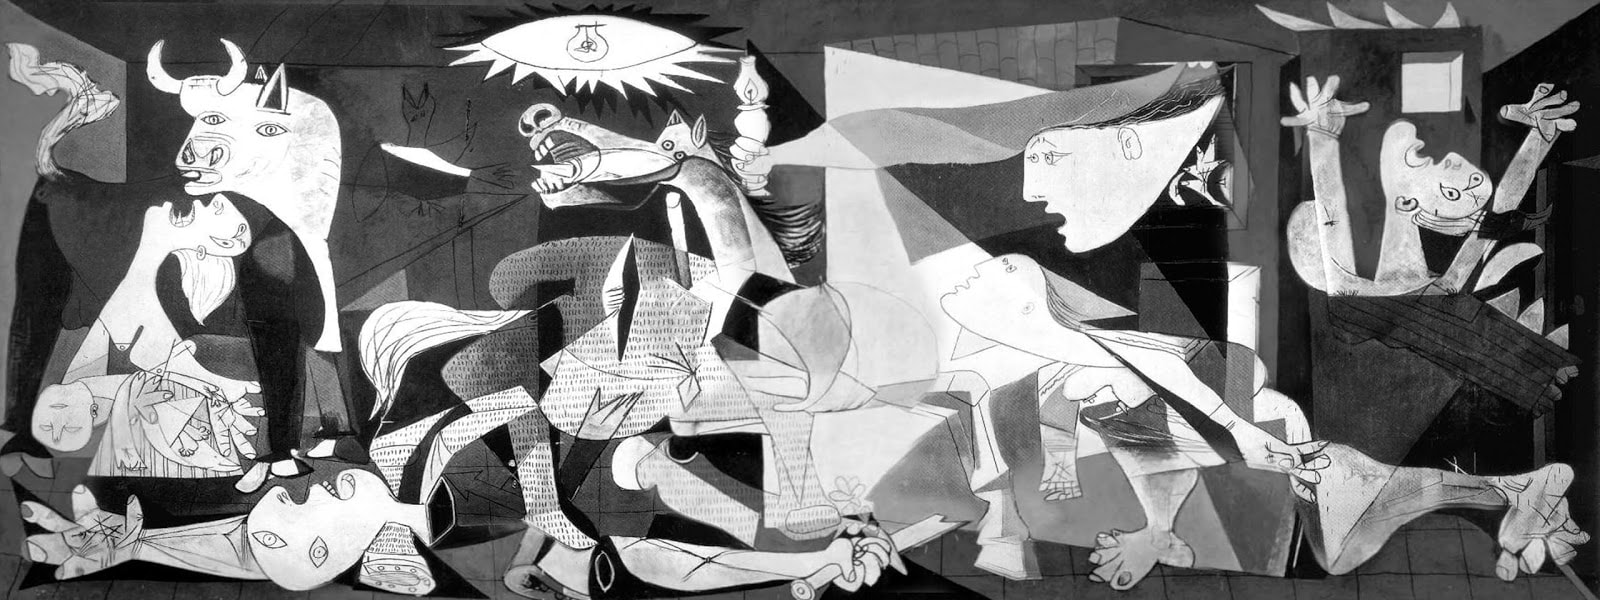 A picture of the Guernica, and a link to a blog entry about the art in Portugal and Spain.